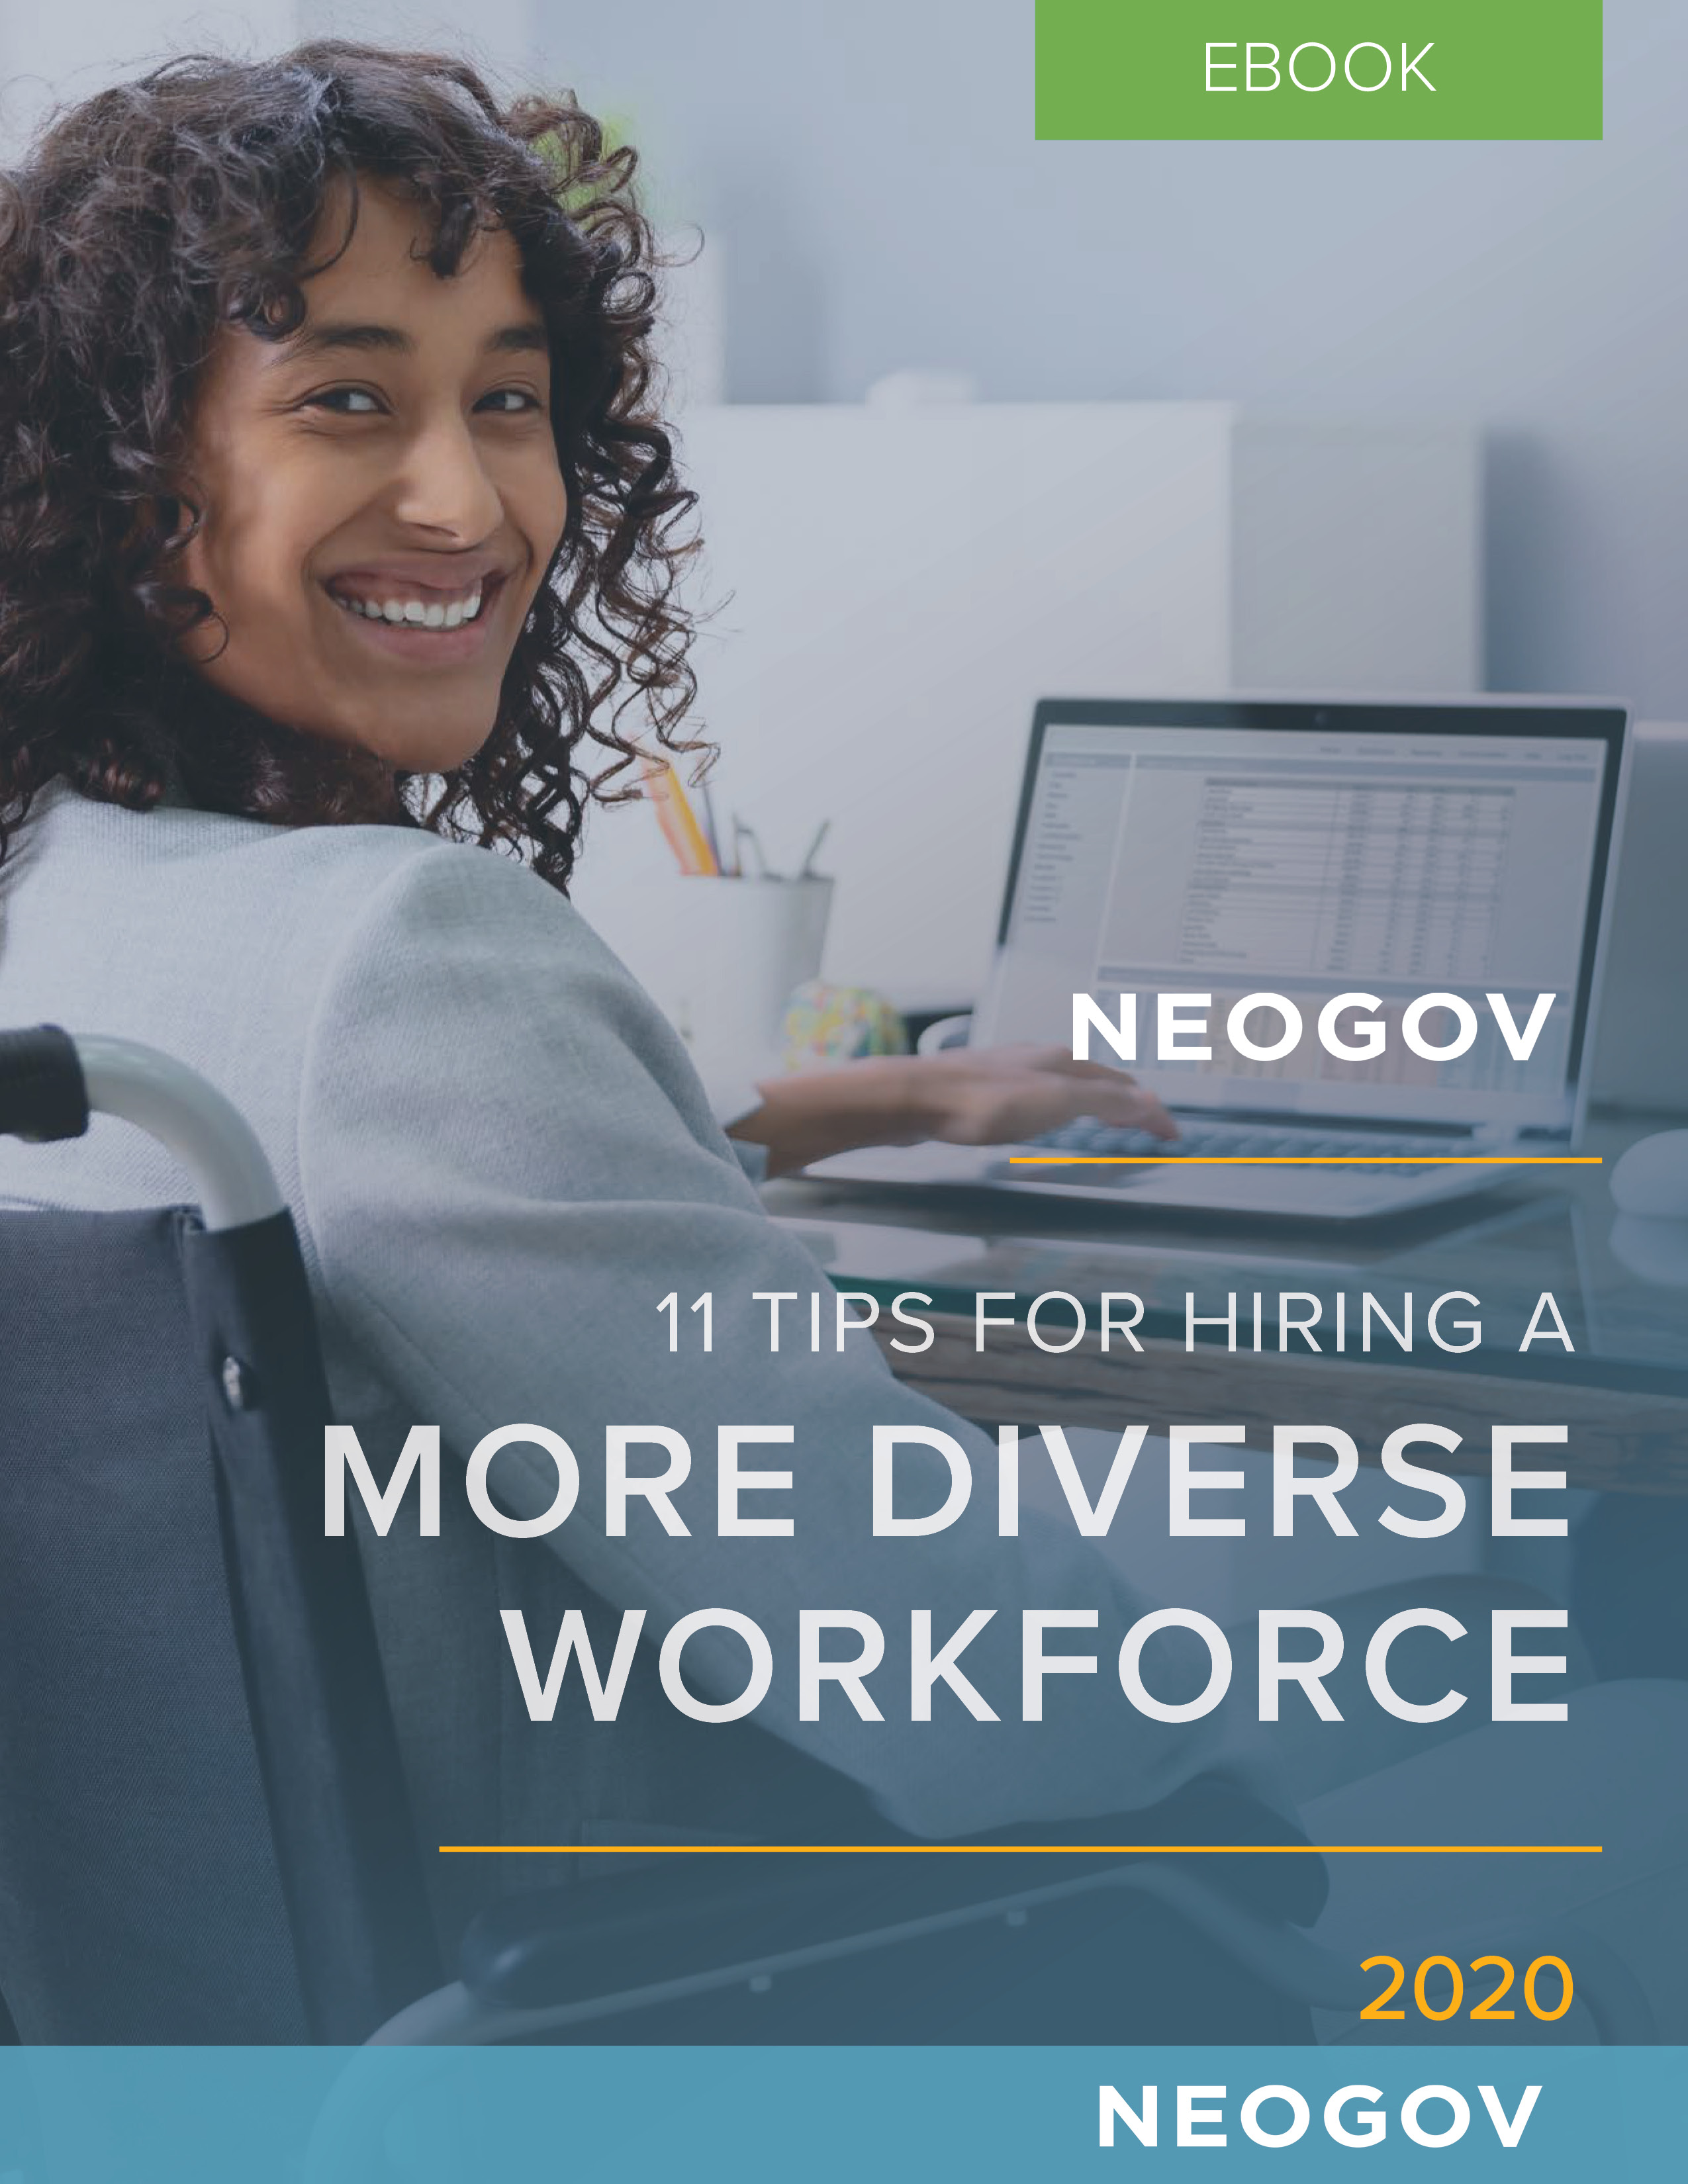 11 Tips for a More Diverse Workforce